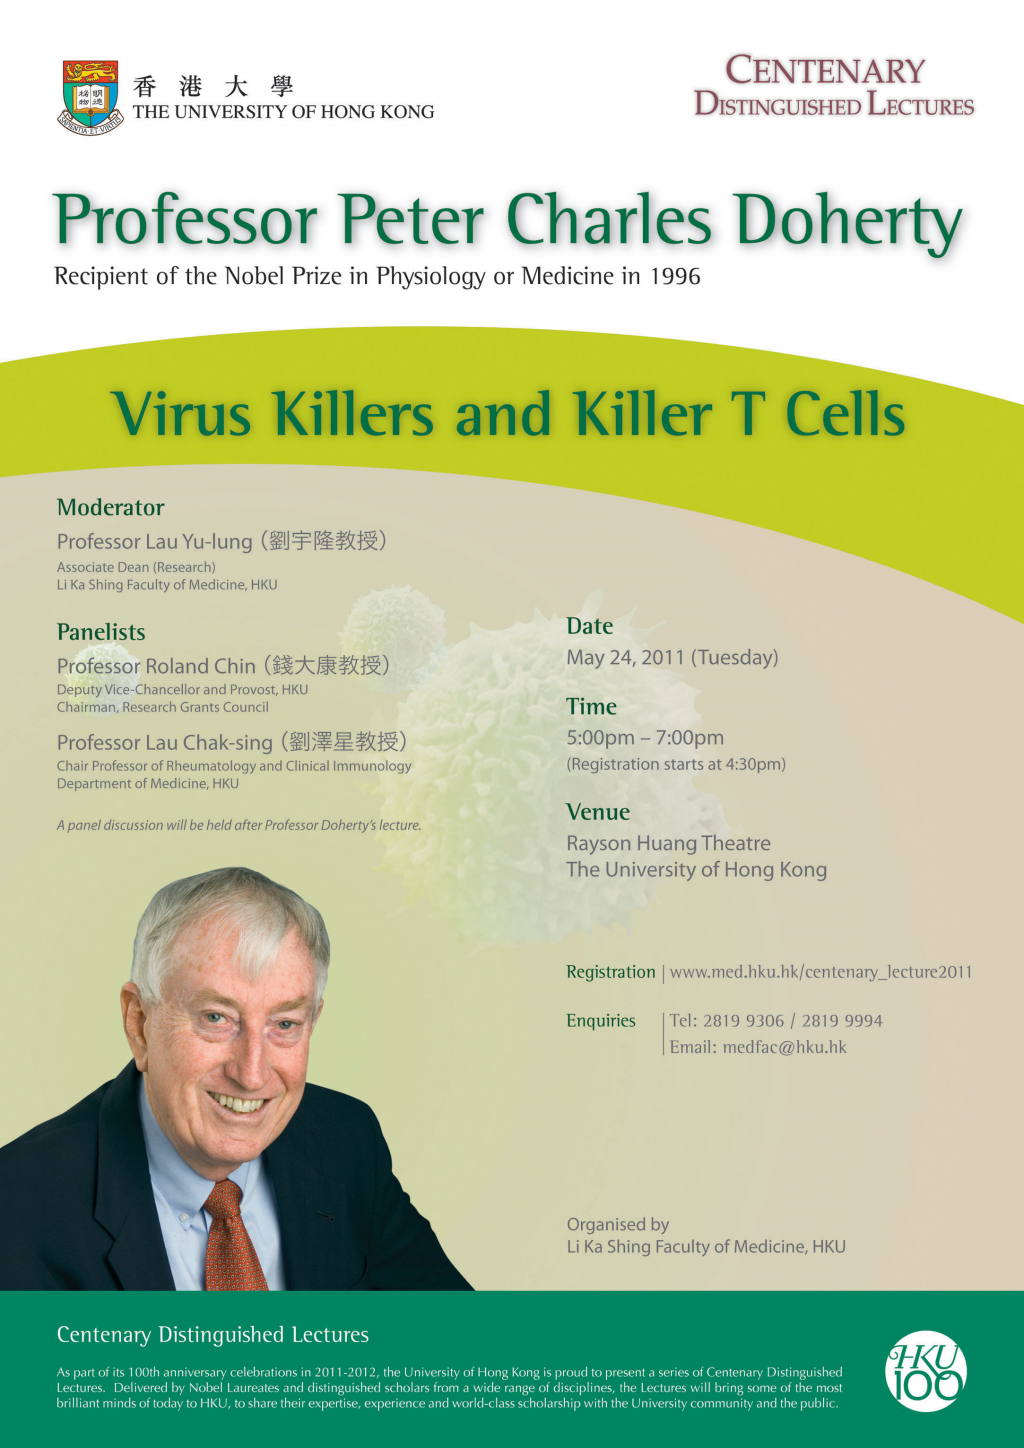 Centenary Distinguished Lecture by Professor Peter Charles Doherty